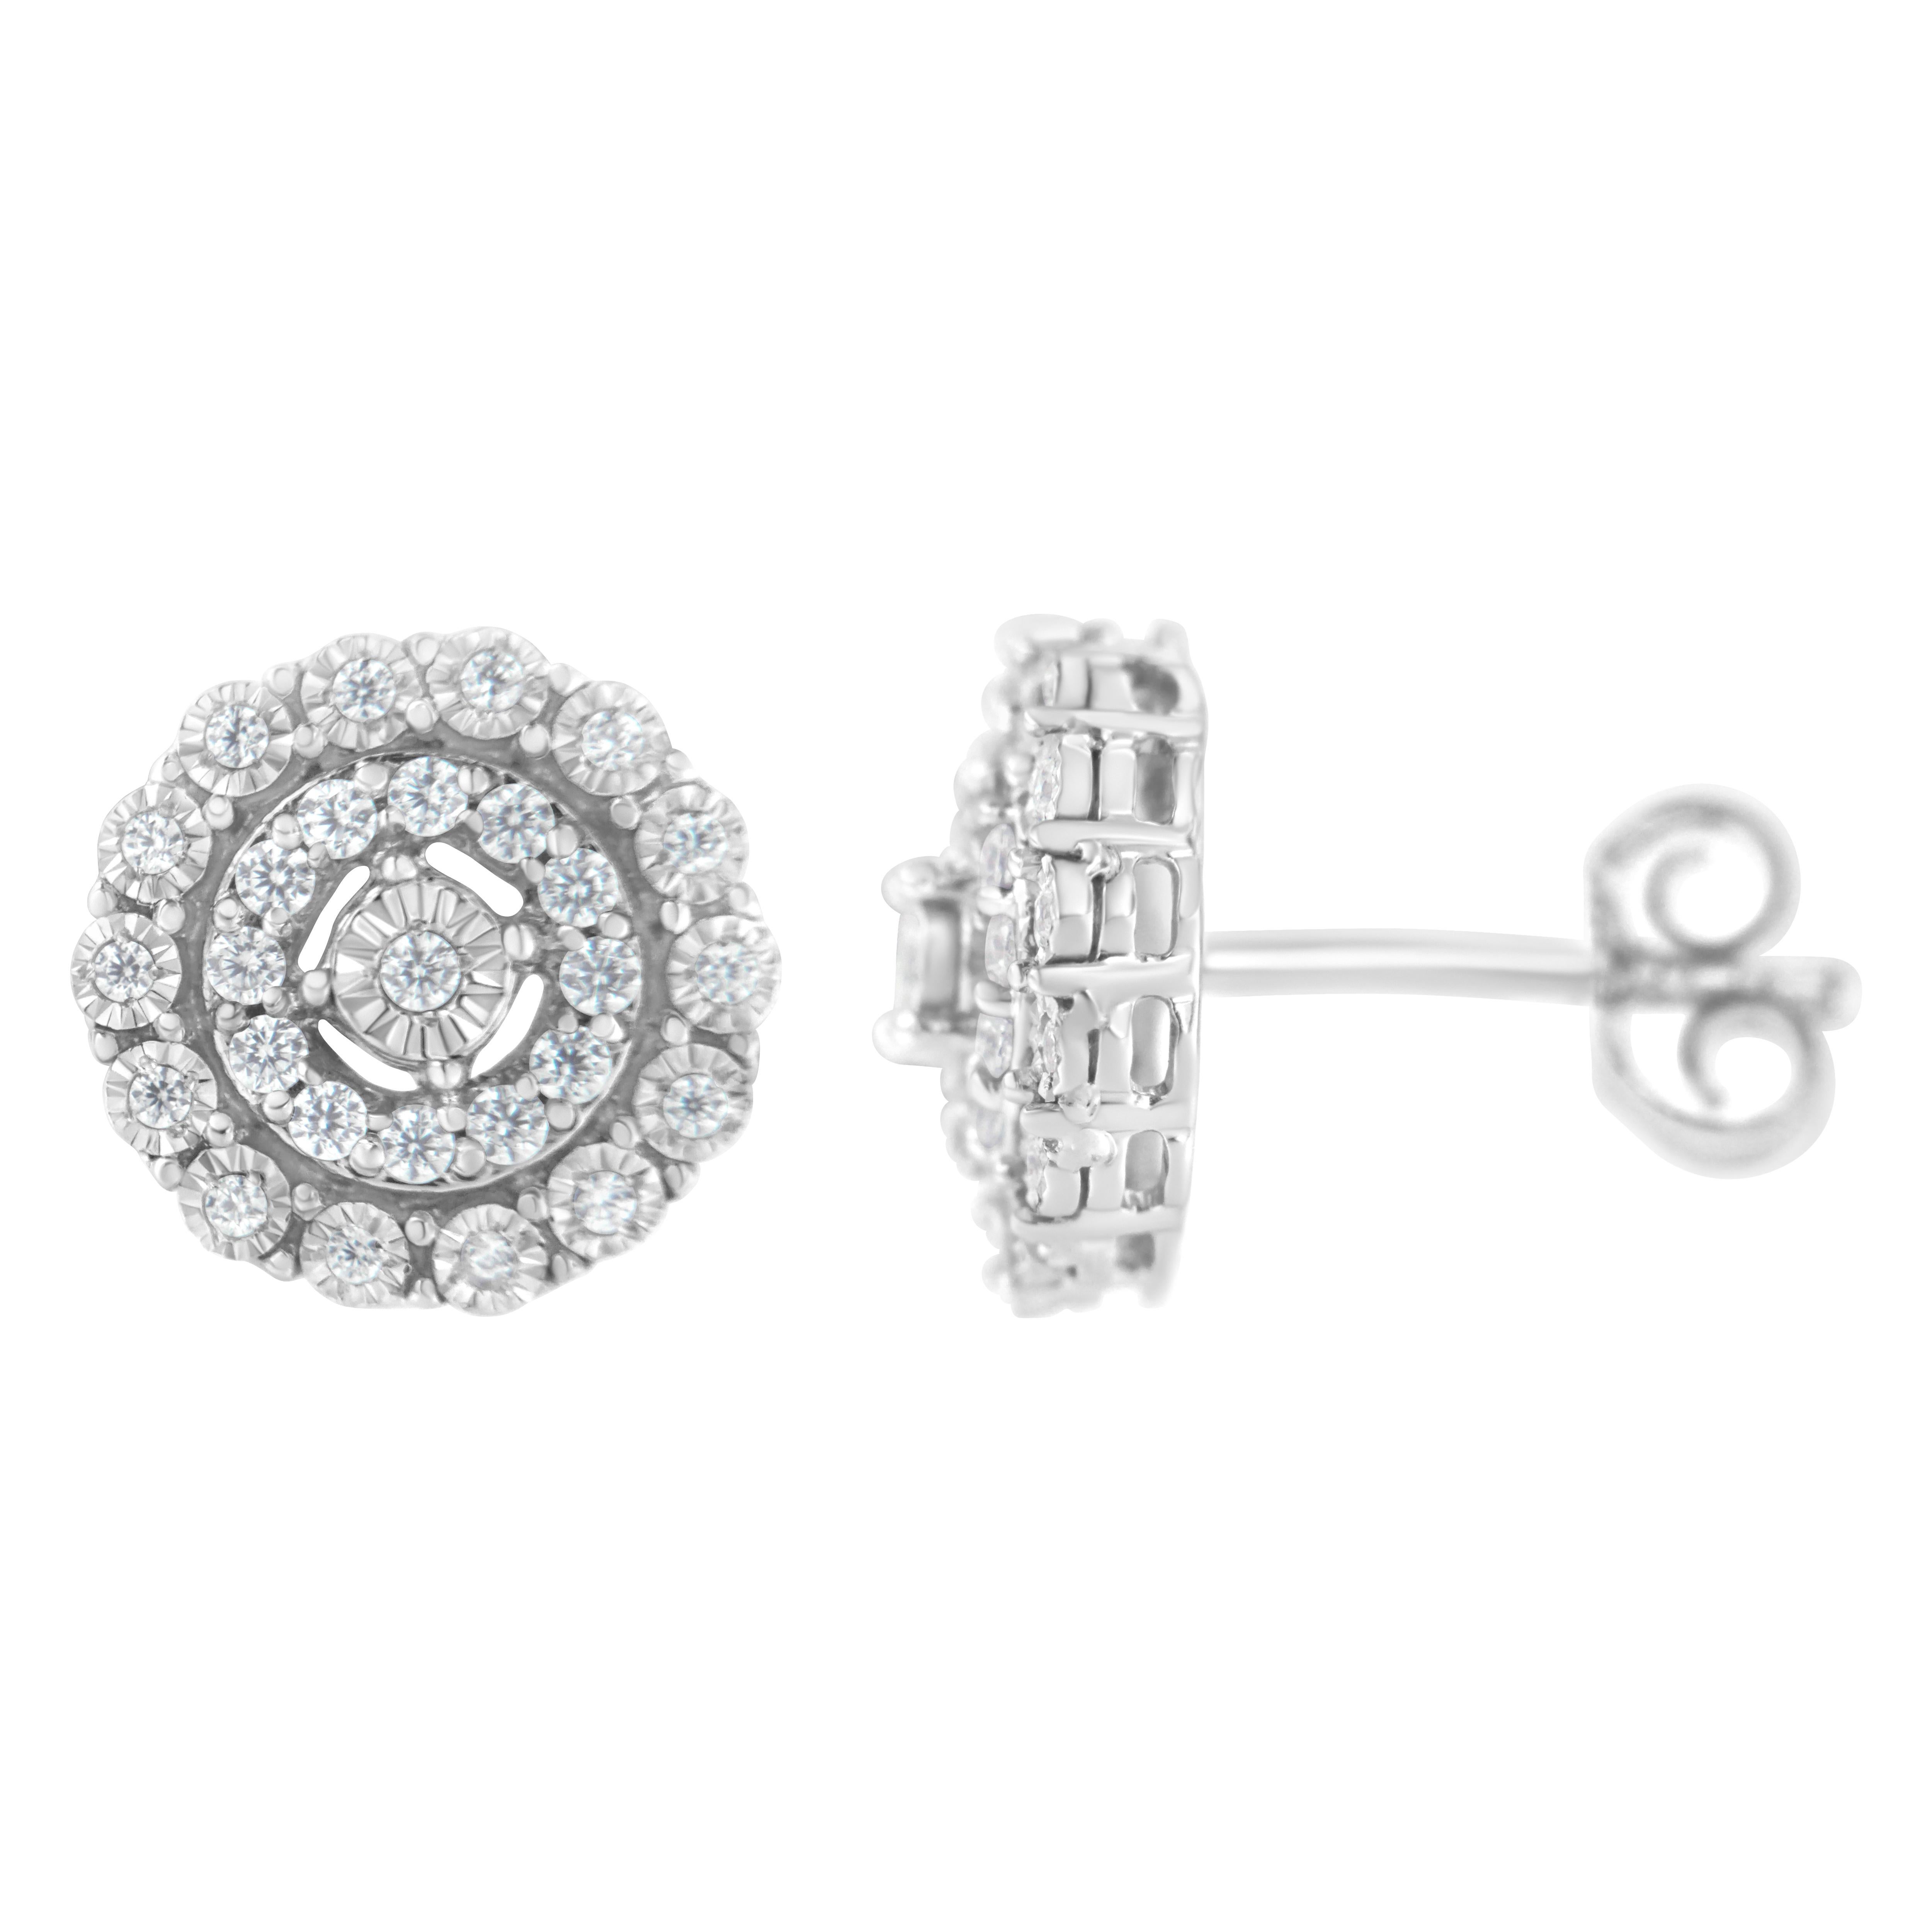 These striking stud earrings are crafted in polished 10k white gold and feature 1/2ct TDW of diamonds. A round cut diamond sits at the center of the design. A double floating halo studded with additional sparkling round diamonds wraps around the